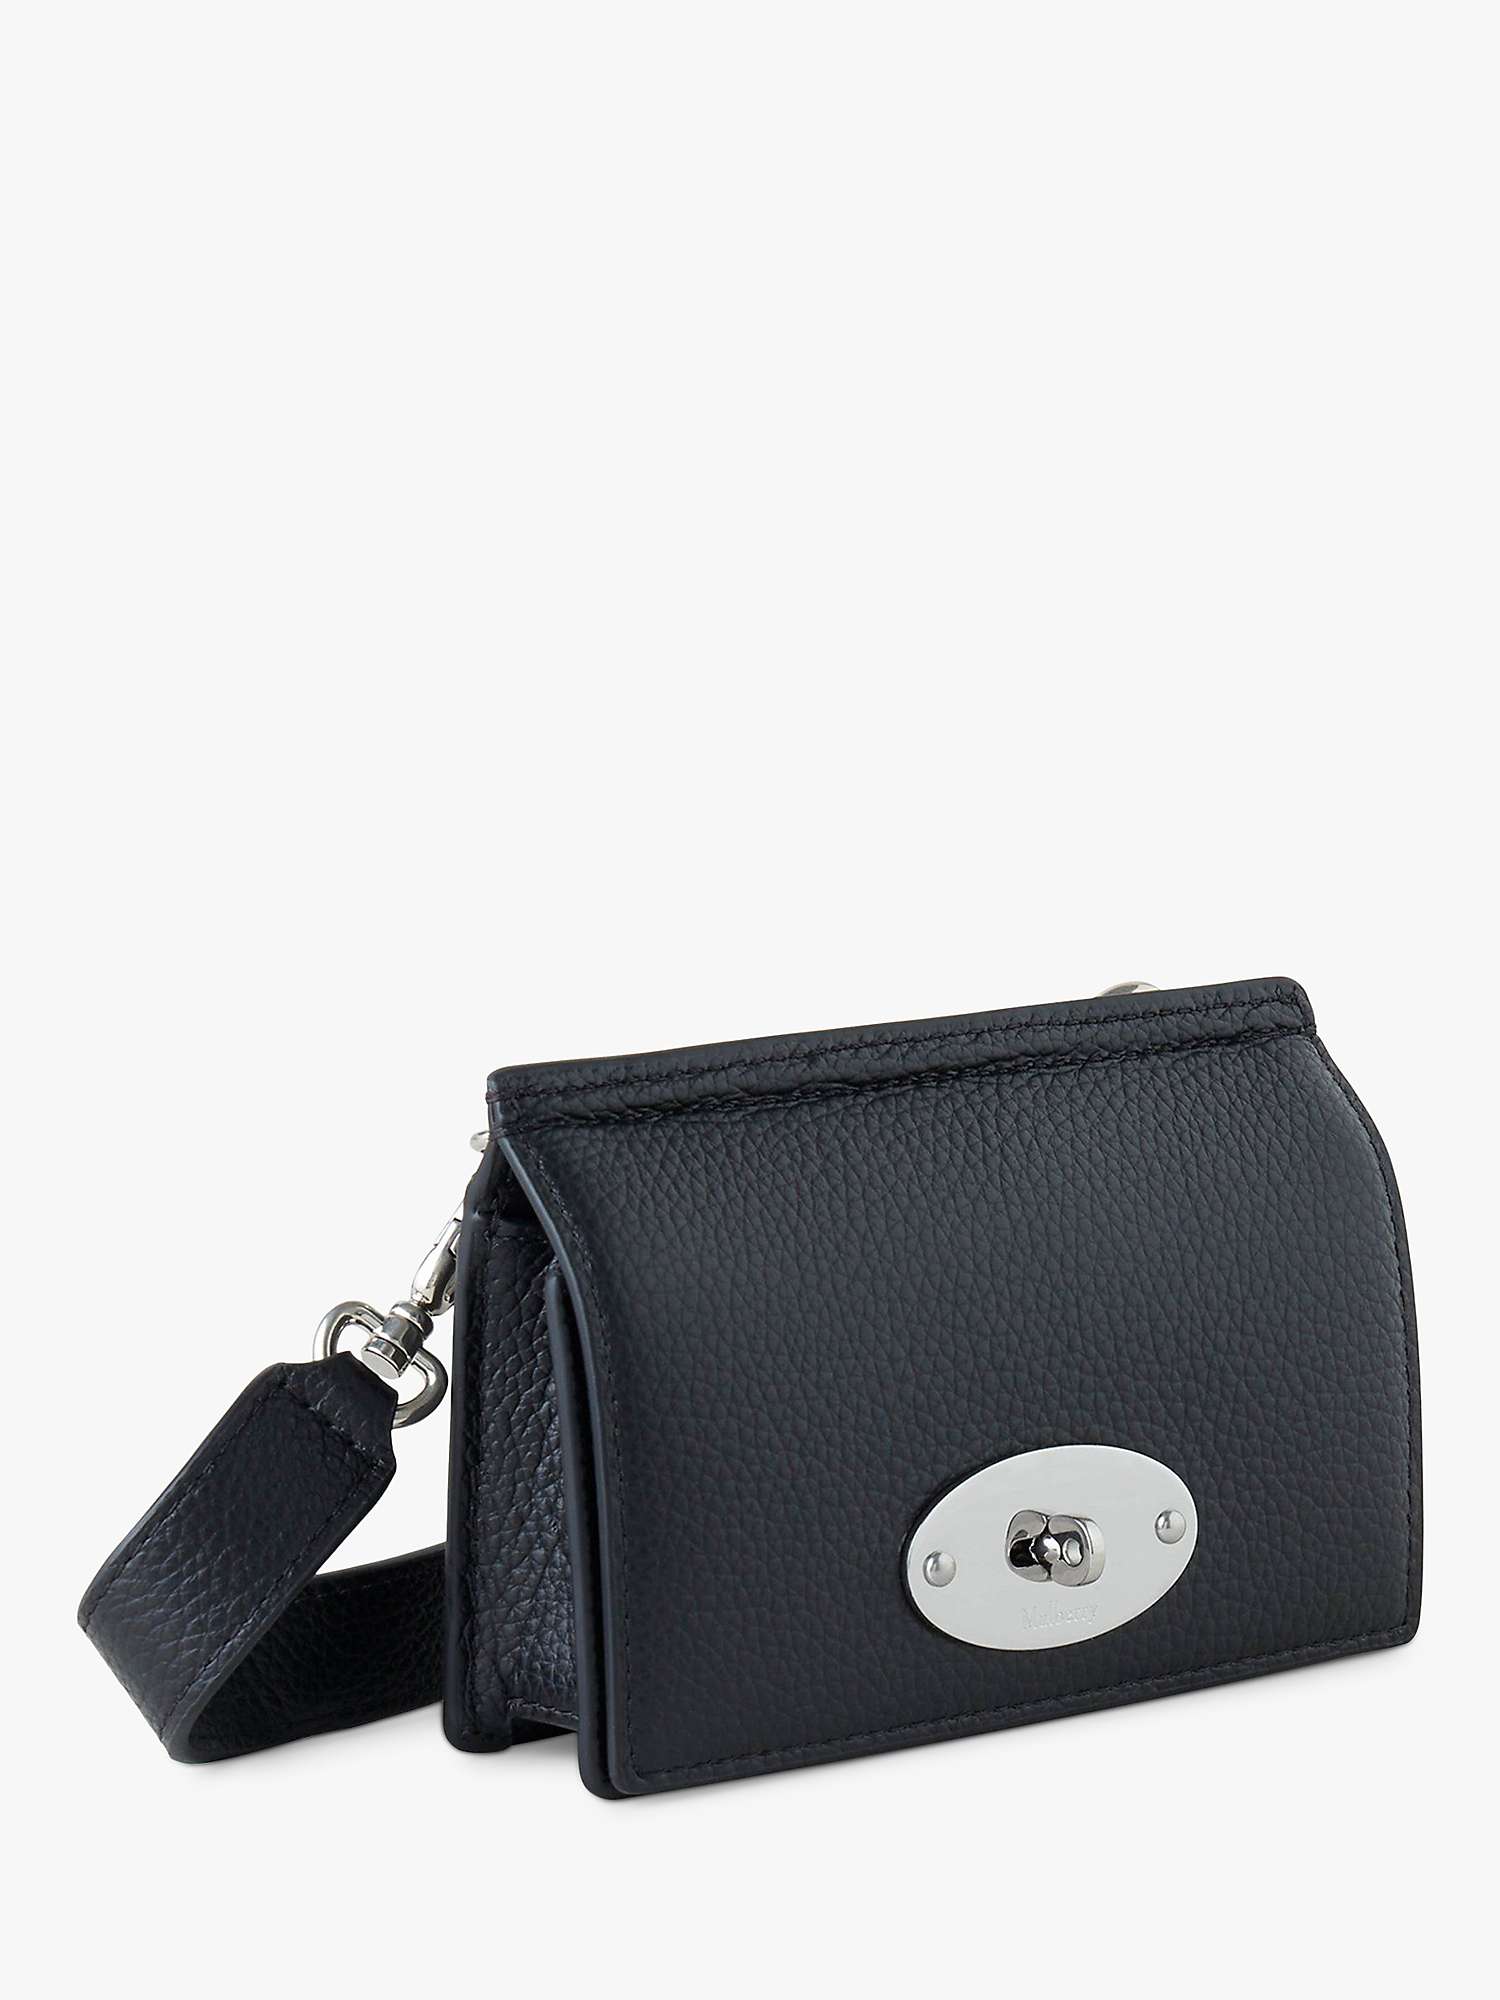 Buy Mulberry East West Antony Small Classic Grain Leather Pouch, Black Online at johnlewis.com